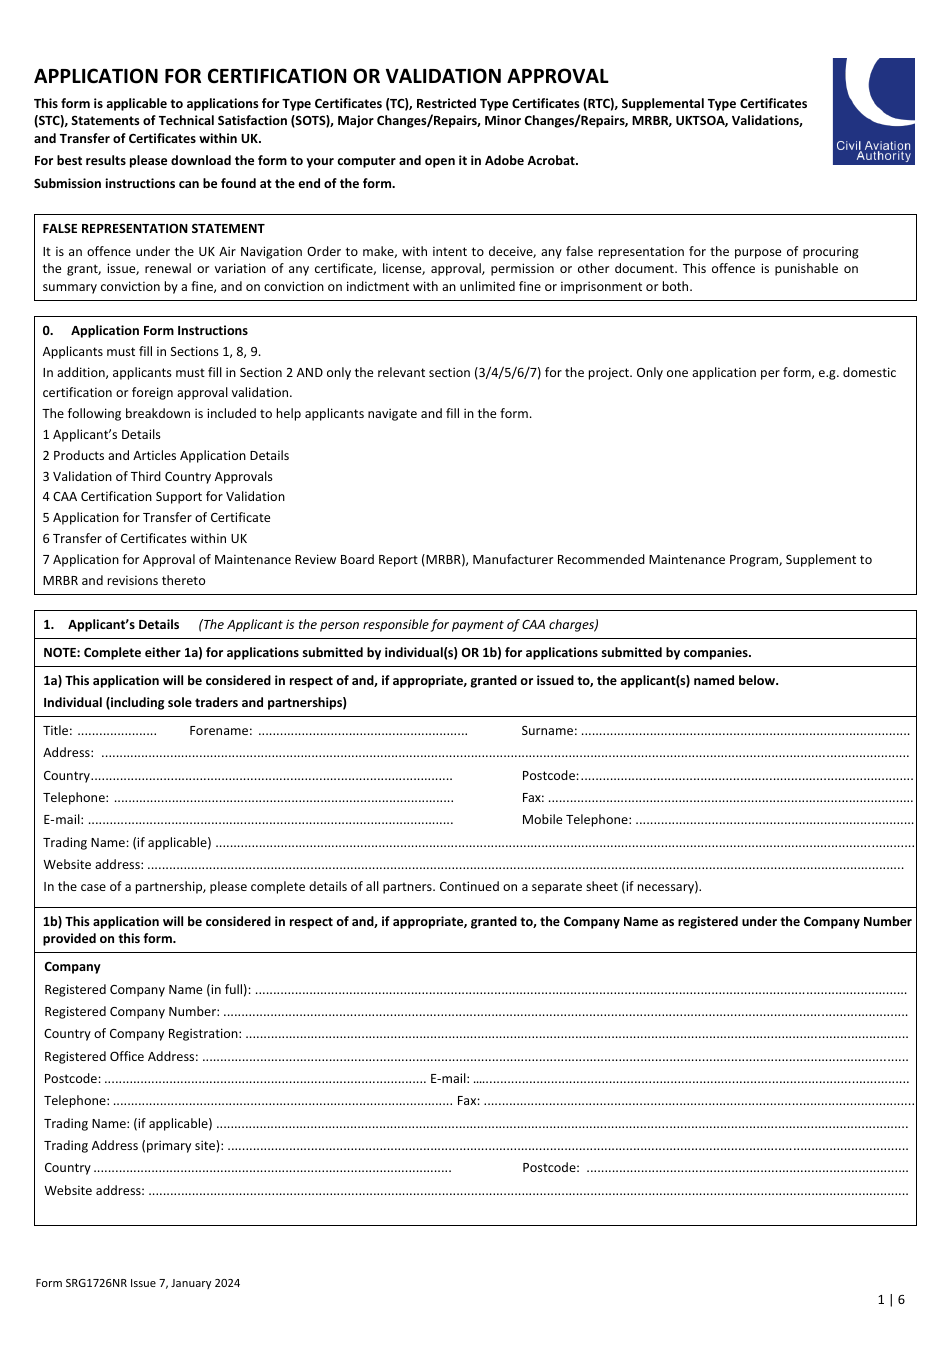 Form SRG1726NR Application for Certification or Validation Approval - United Kingdom, Page 1